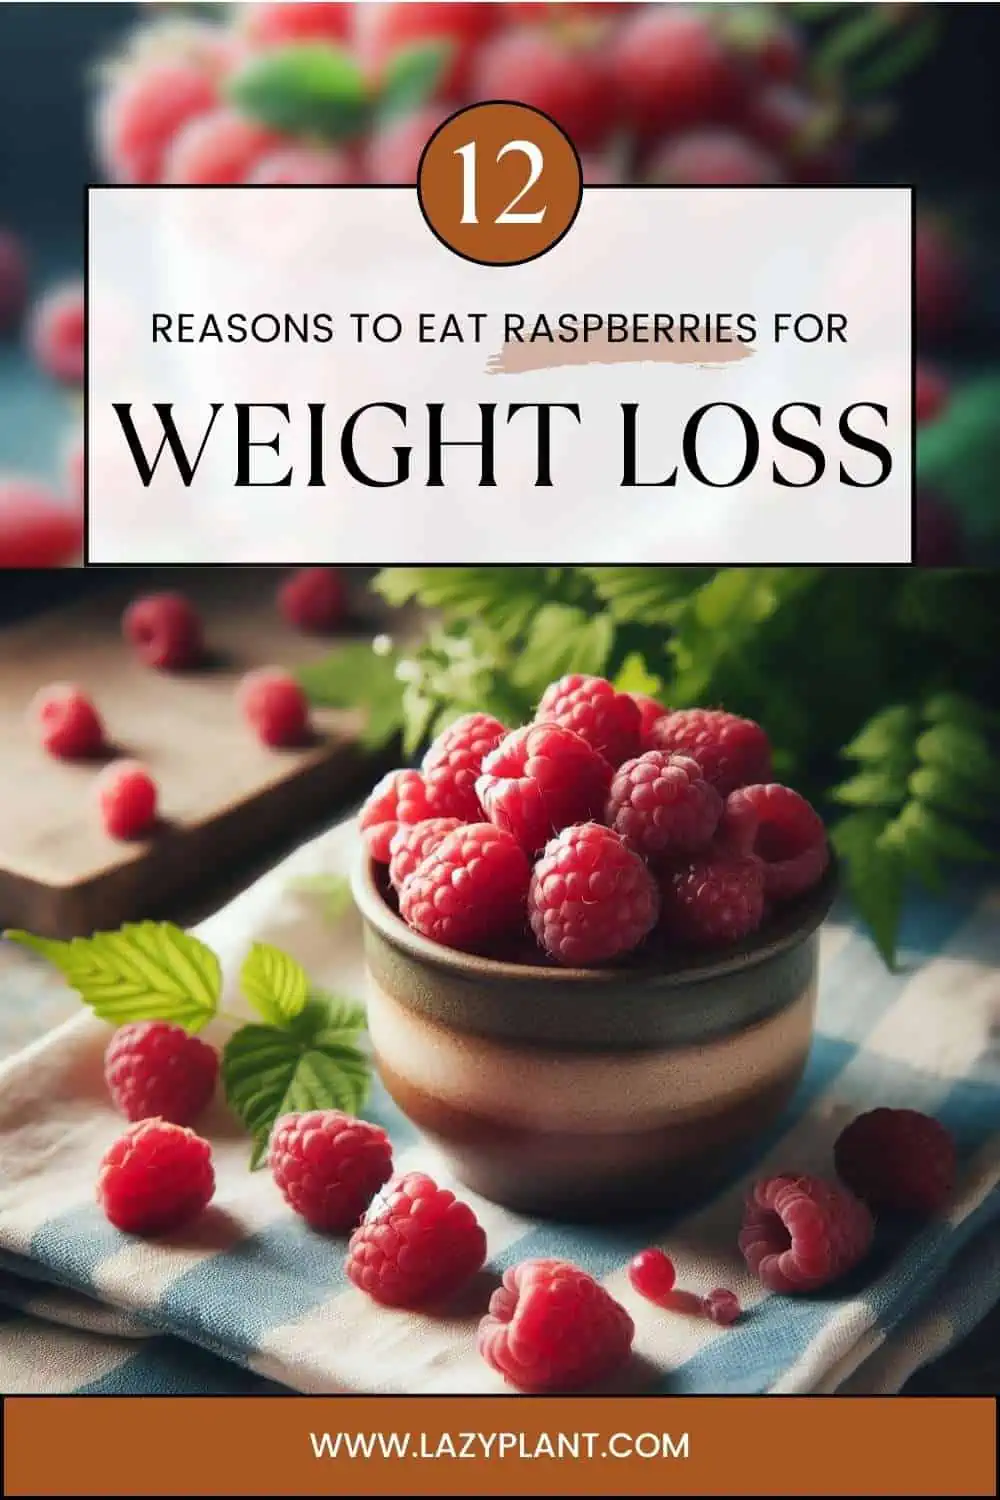 12 reasons to eat Raspberries for Weight Loss!